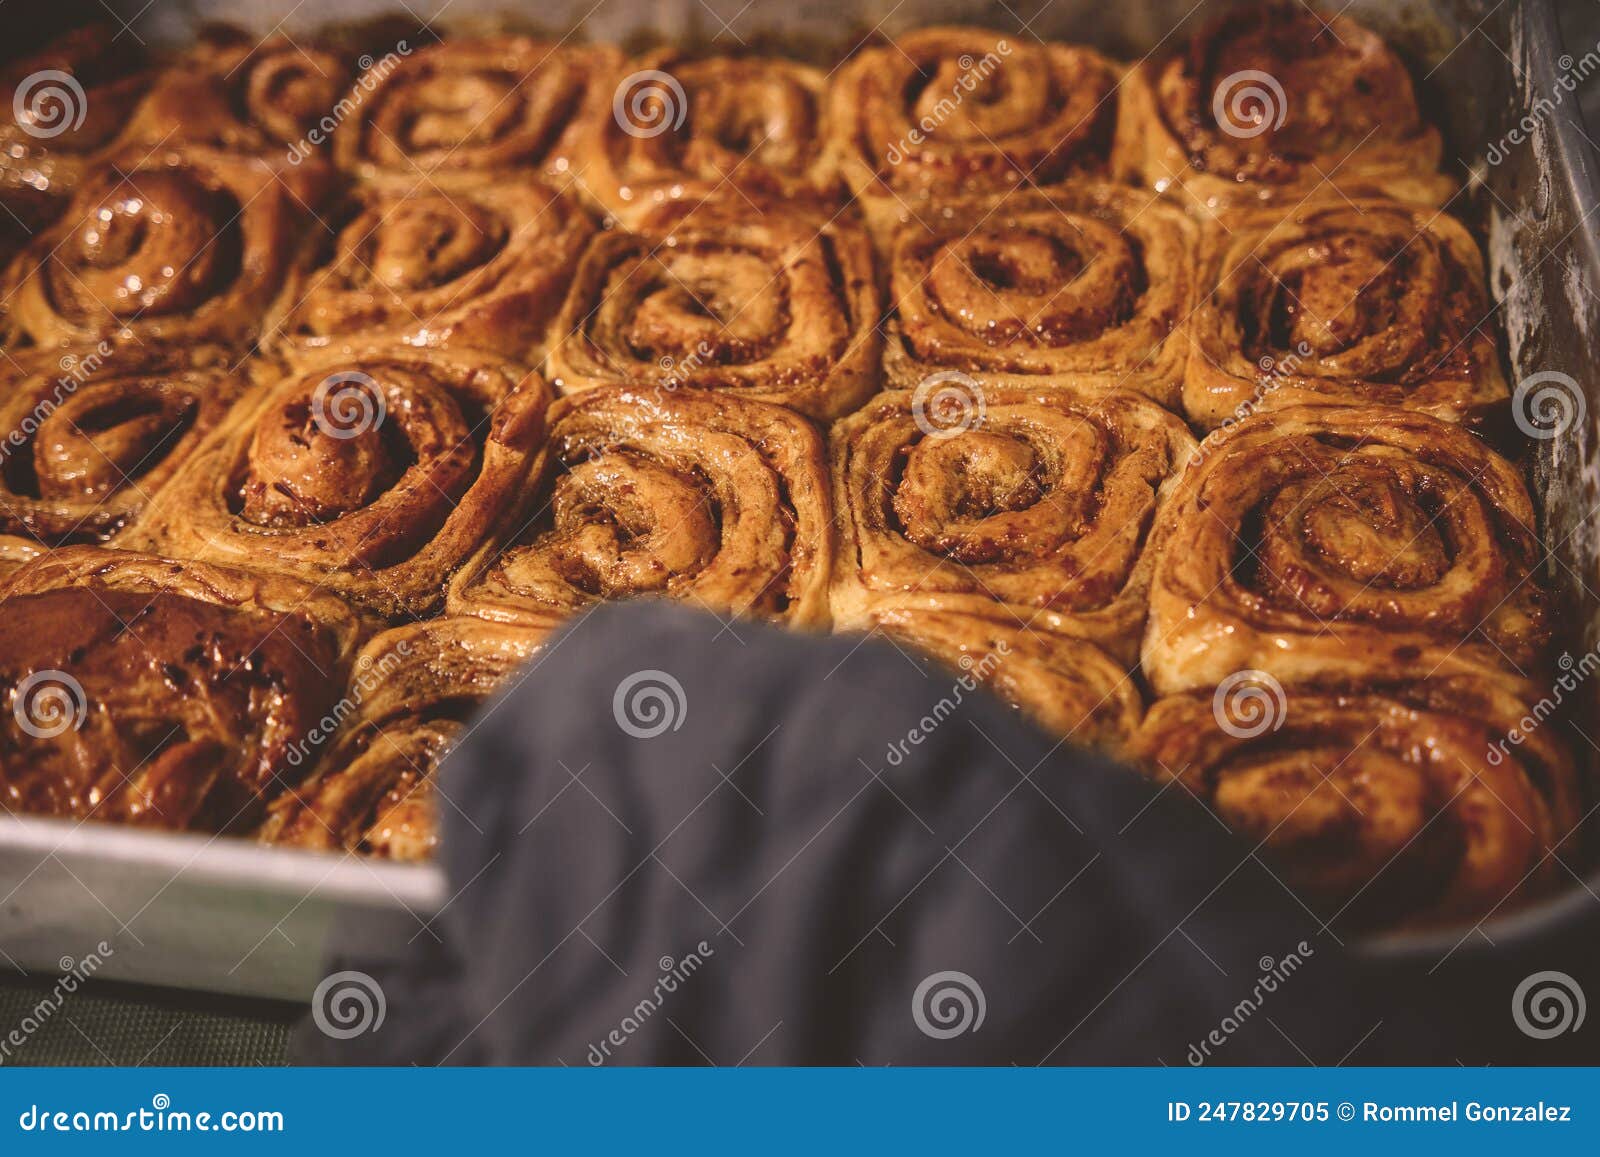 cinnamon rolls with cheese baked and ready to eat. golfeados typical dessert in venezuela.